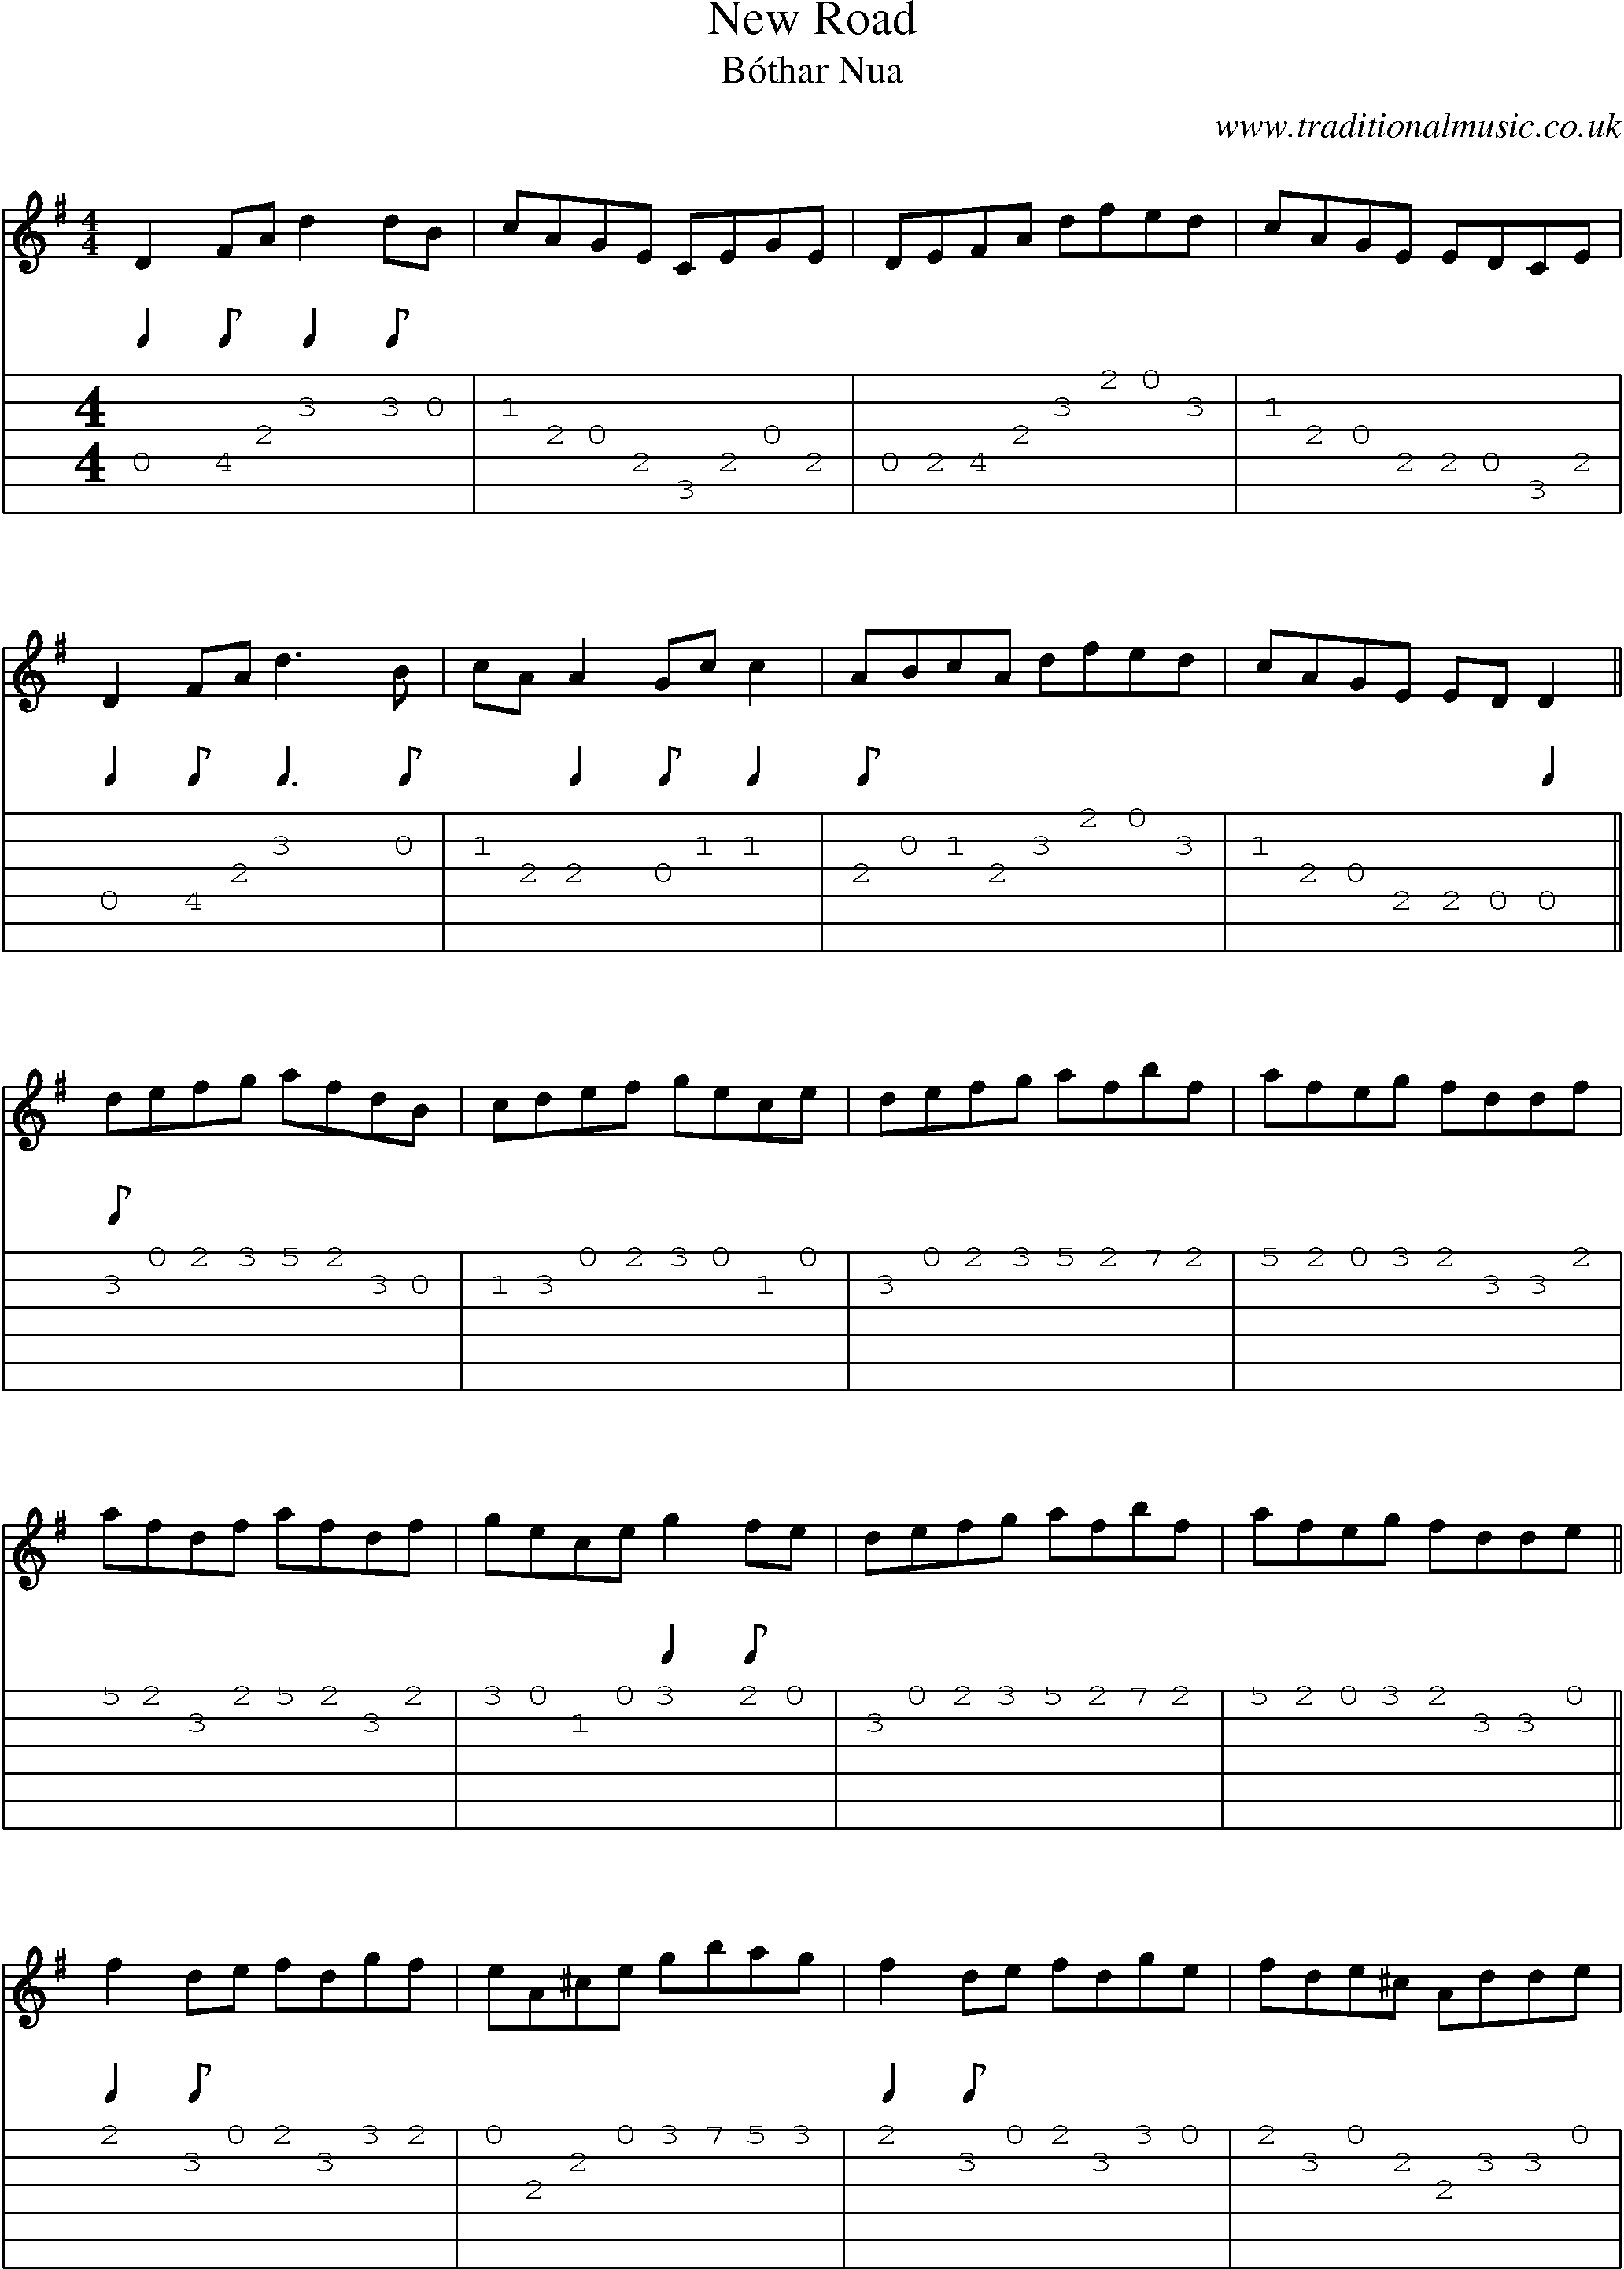 Music Score and Guitar Tabs for New Road